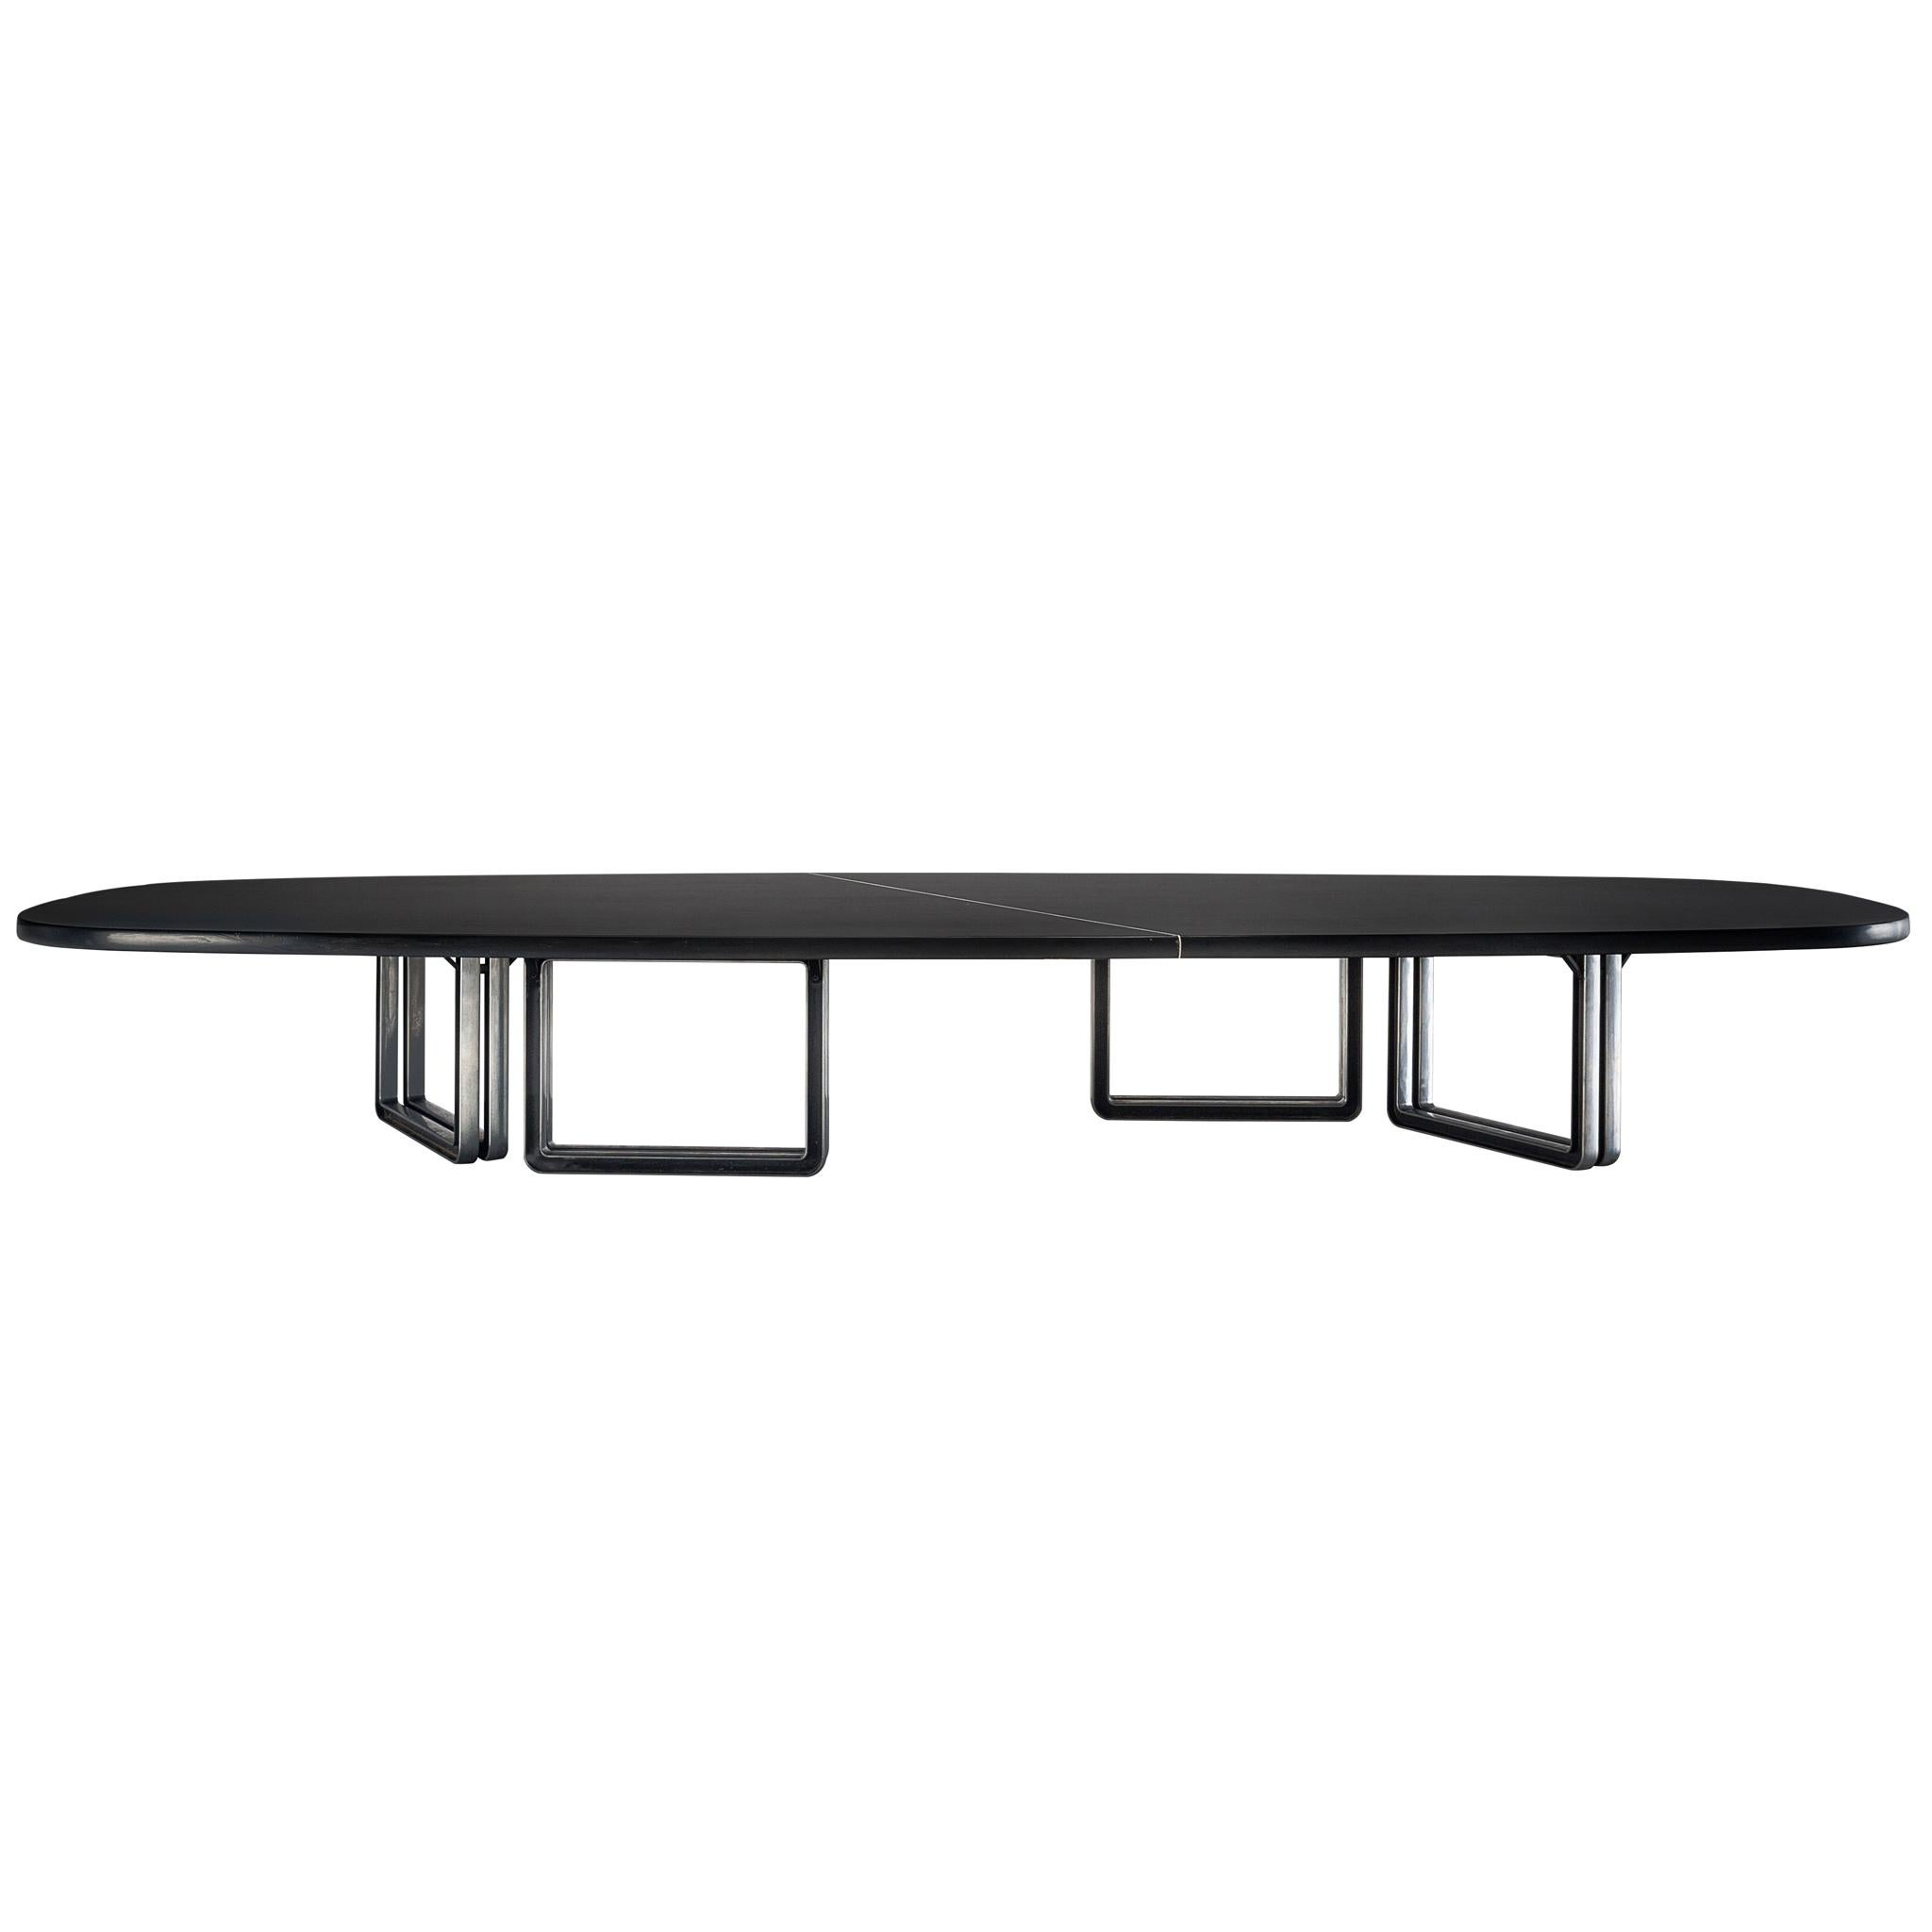 Tecno Design Centre for Tecno, lacquered black wood and aluminum base, conference table 335a, Italy, 1975-1978.

Large oversized conference table with a black top. The table is composed of two black pieces connected via steel inserts and mounted